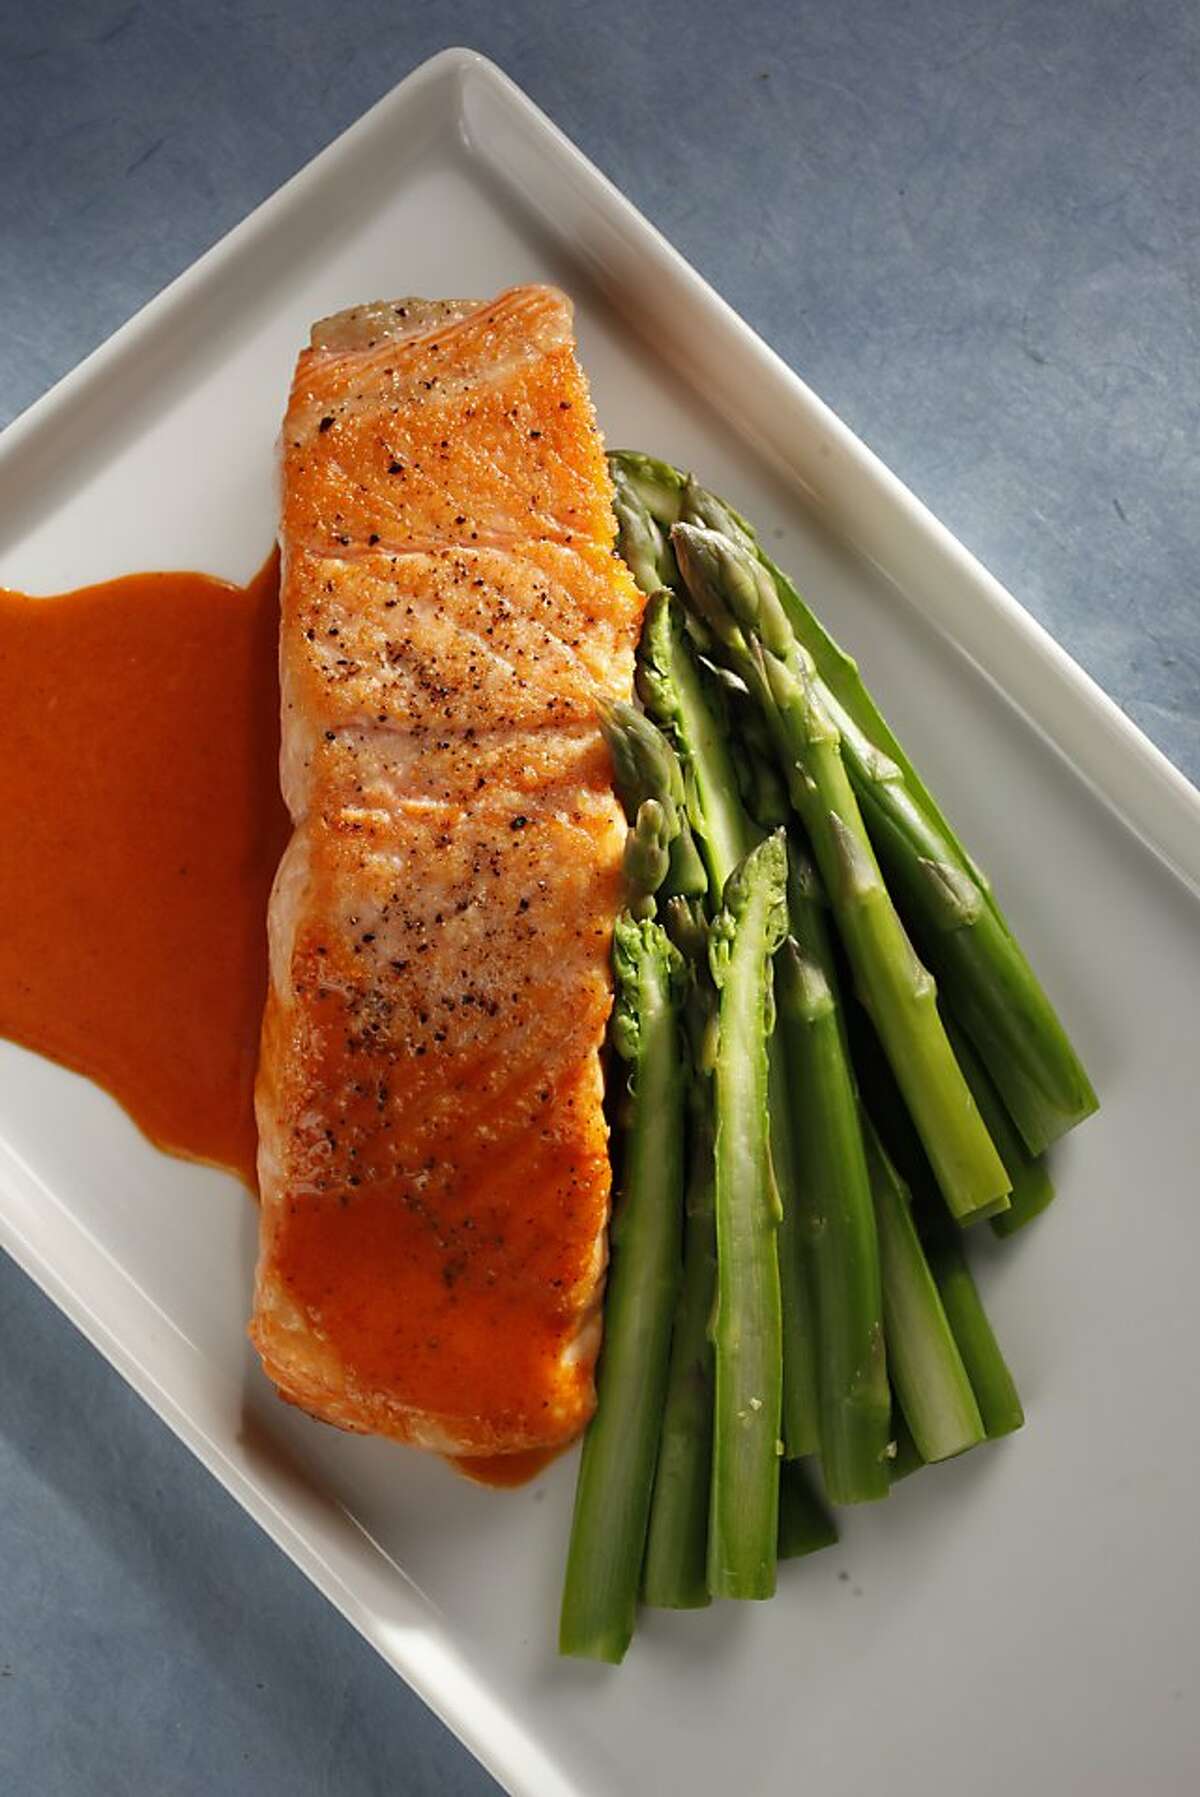 Pan-seared salmon fillet with smokey chili-lime butter sauce as seen in San Francisco, California, on Wednesday April 20, 2011. Food styled by Sophie Brickman.